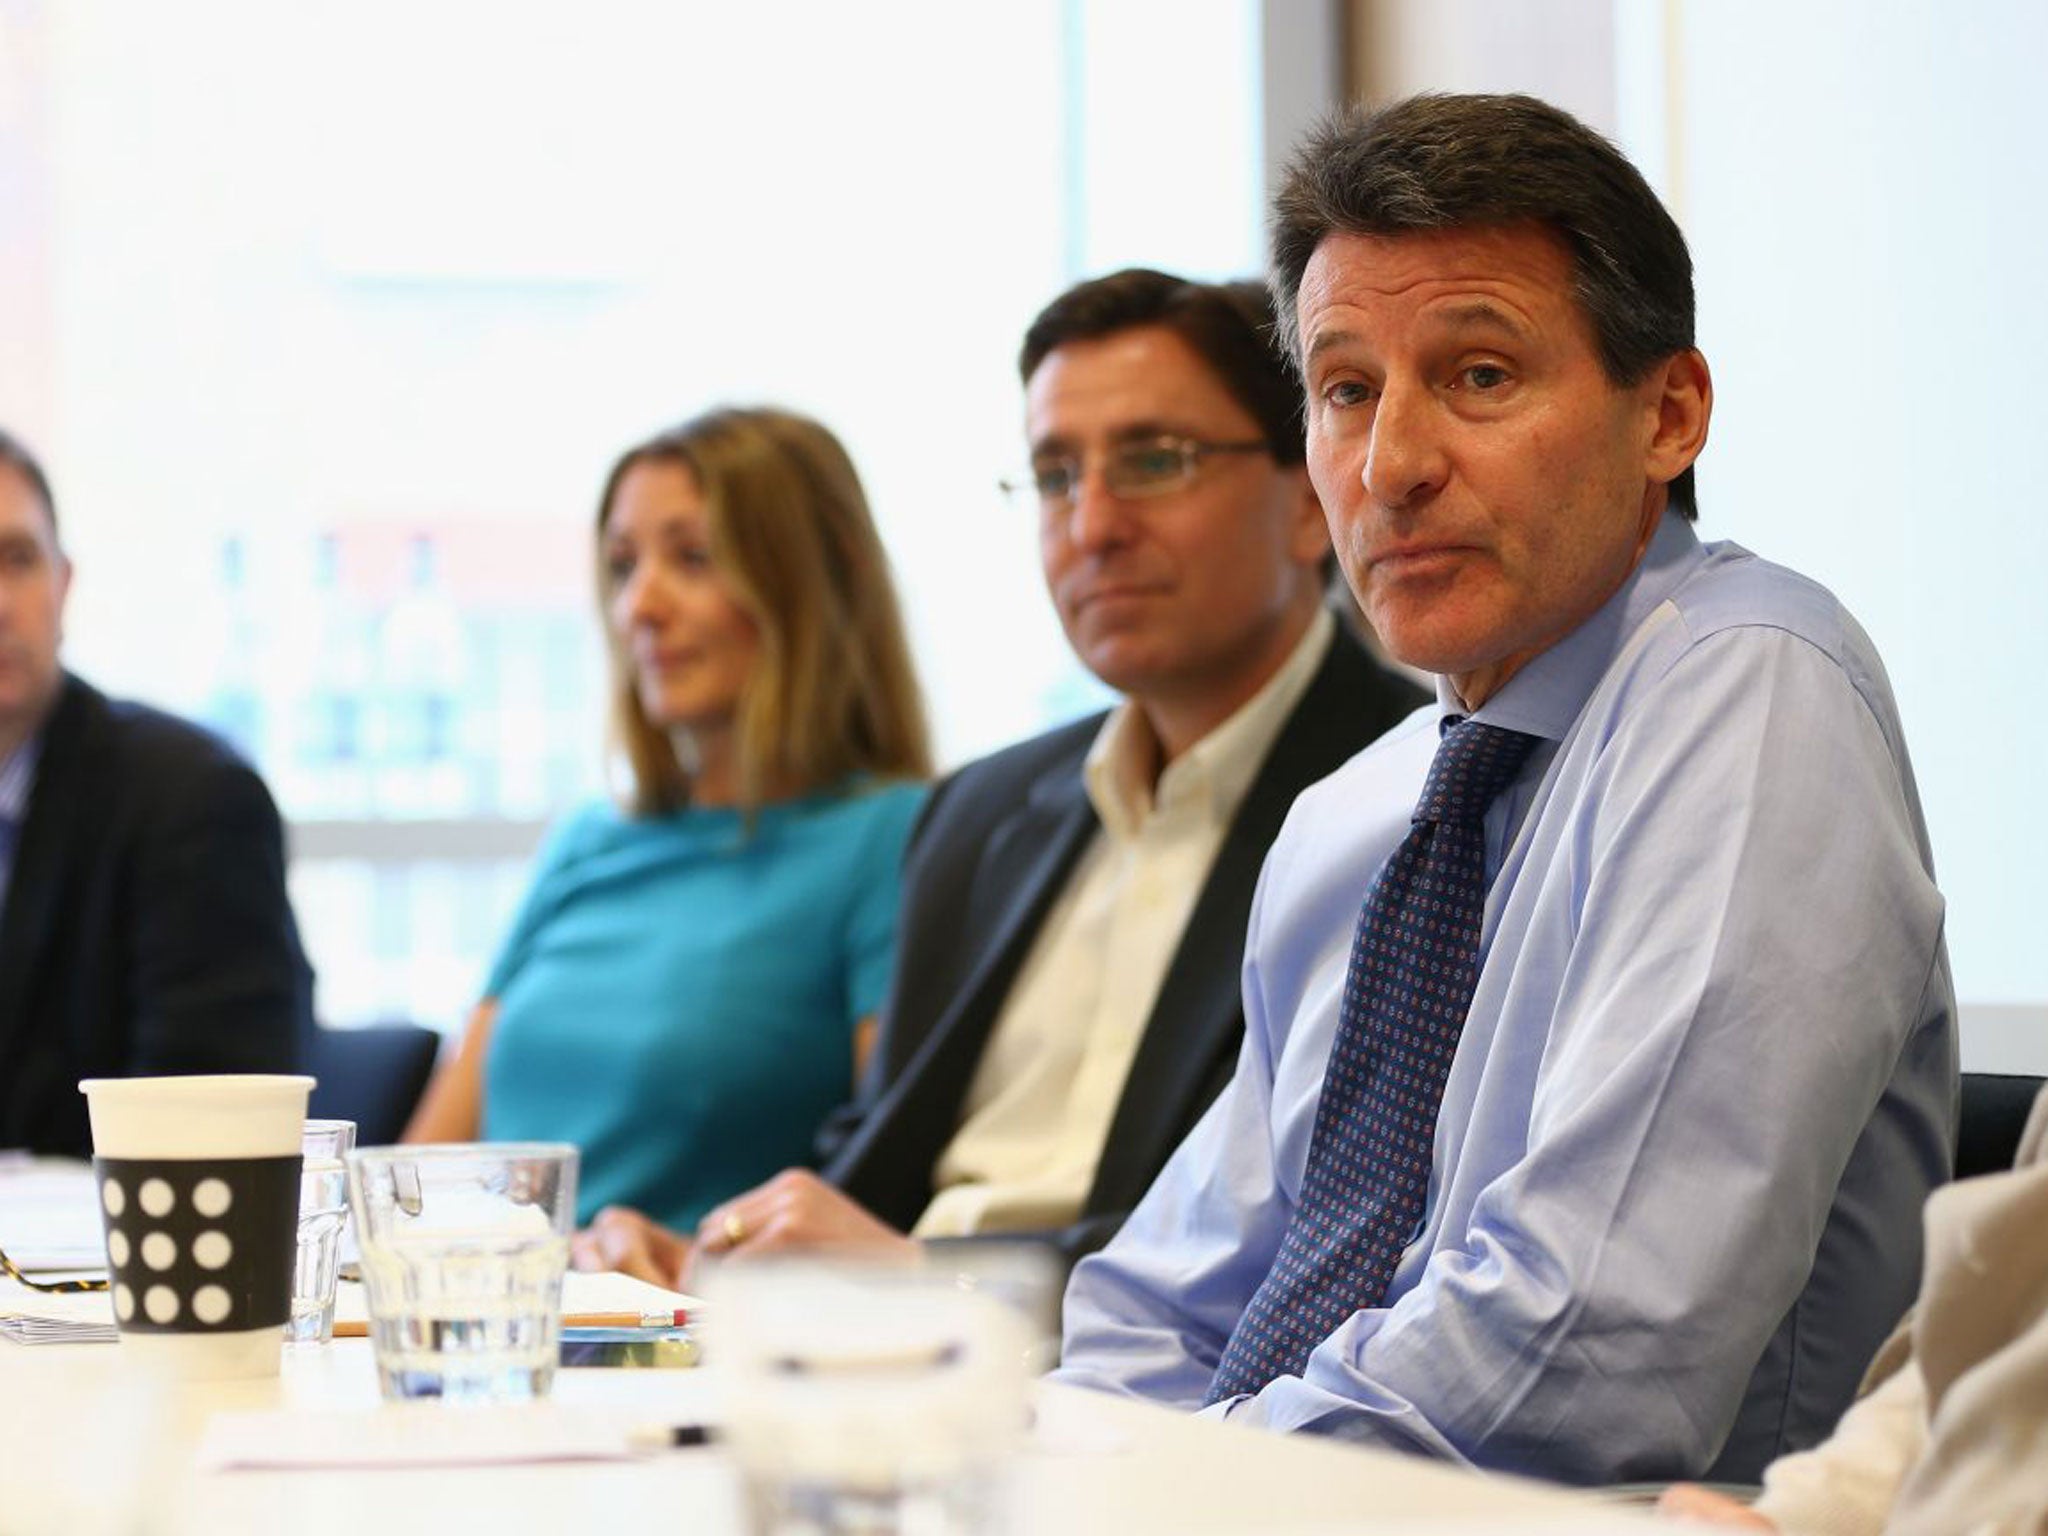 Sebastian Coe has overseen a drastic 50 per cent cut in the number of staff employed by the British Olympic Association